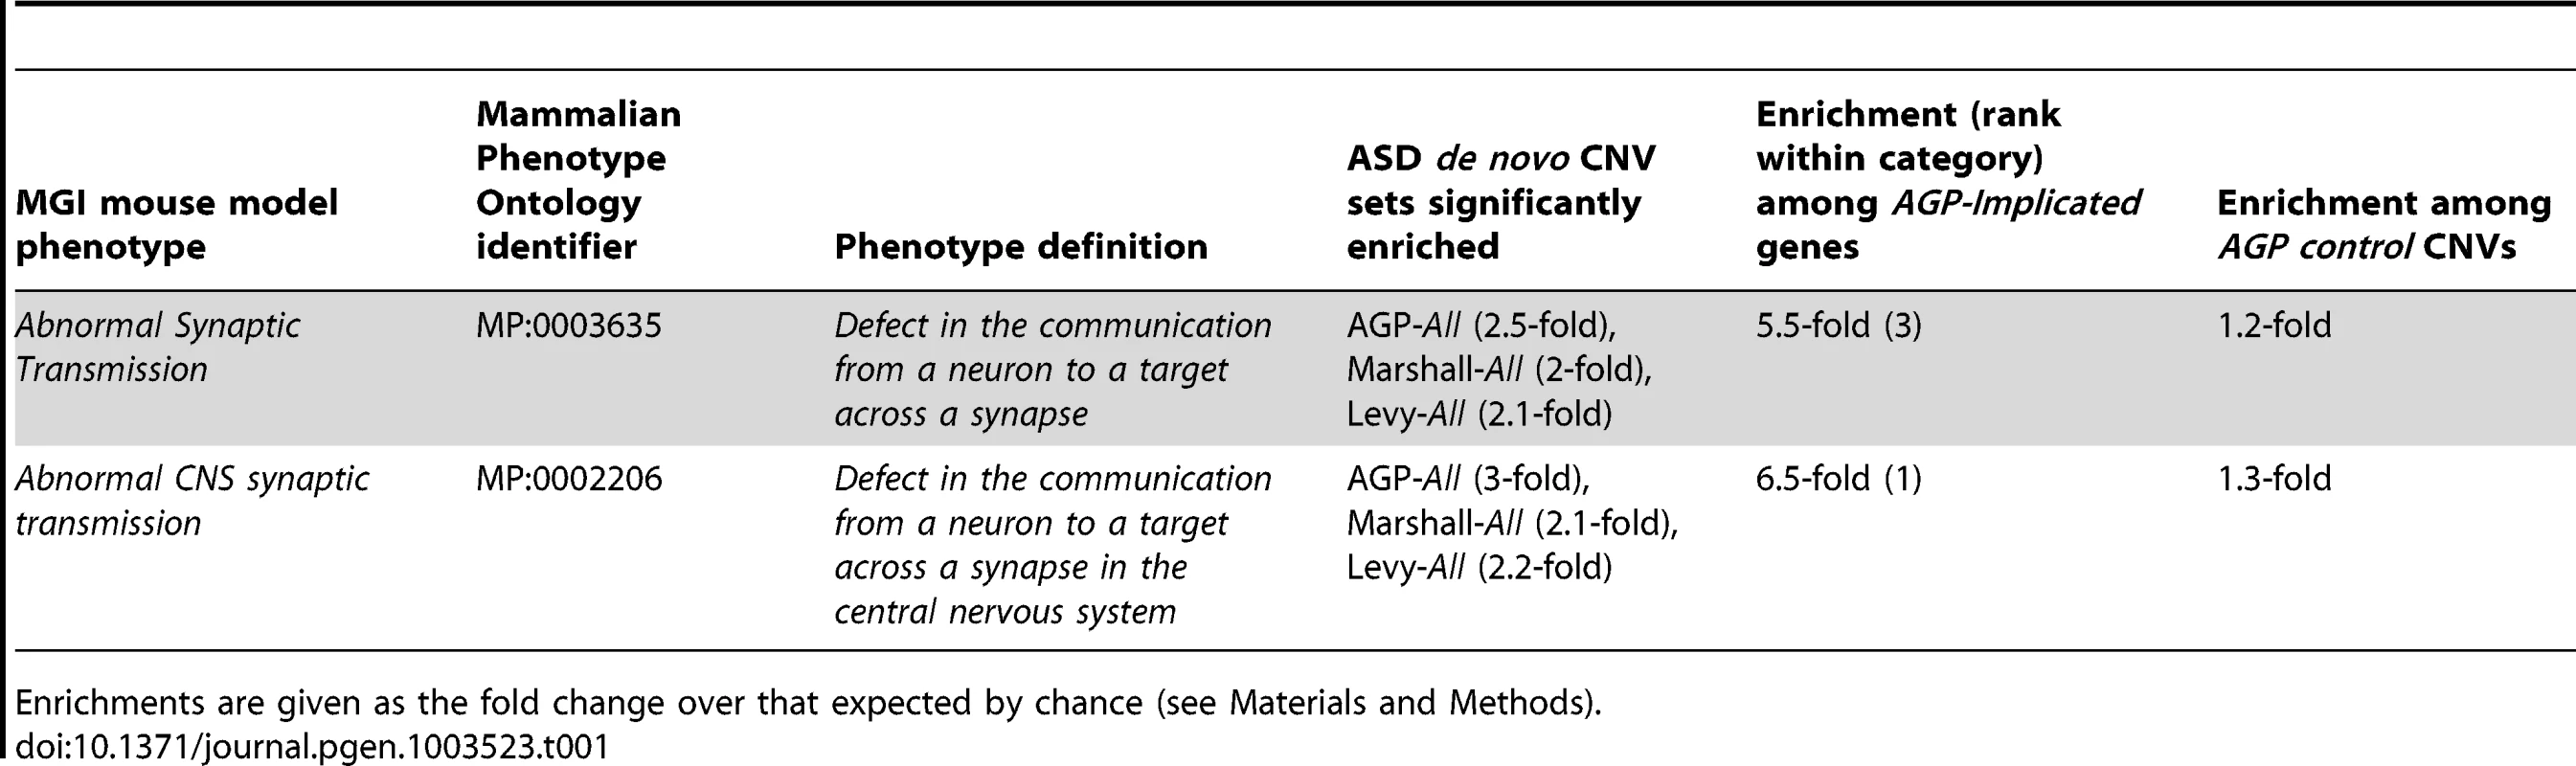 Triplicated mouse model phenotype associations among genes overlapped by sets of <i>de novo</i> CNVs identified in individuals with ASD.